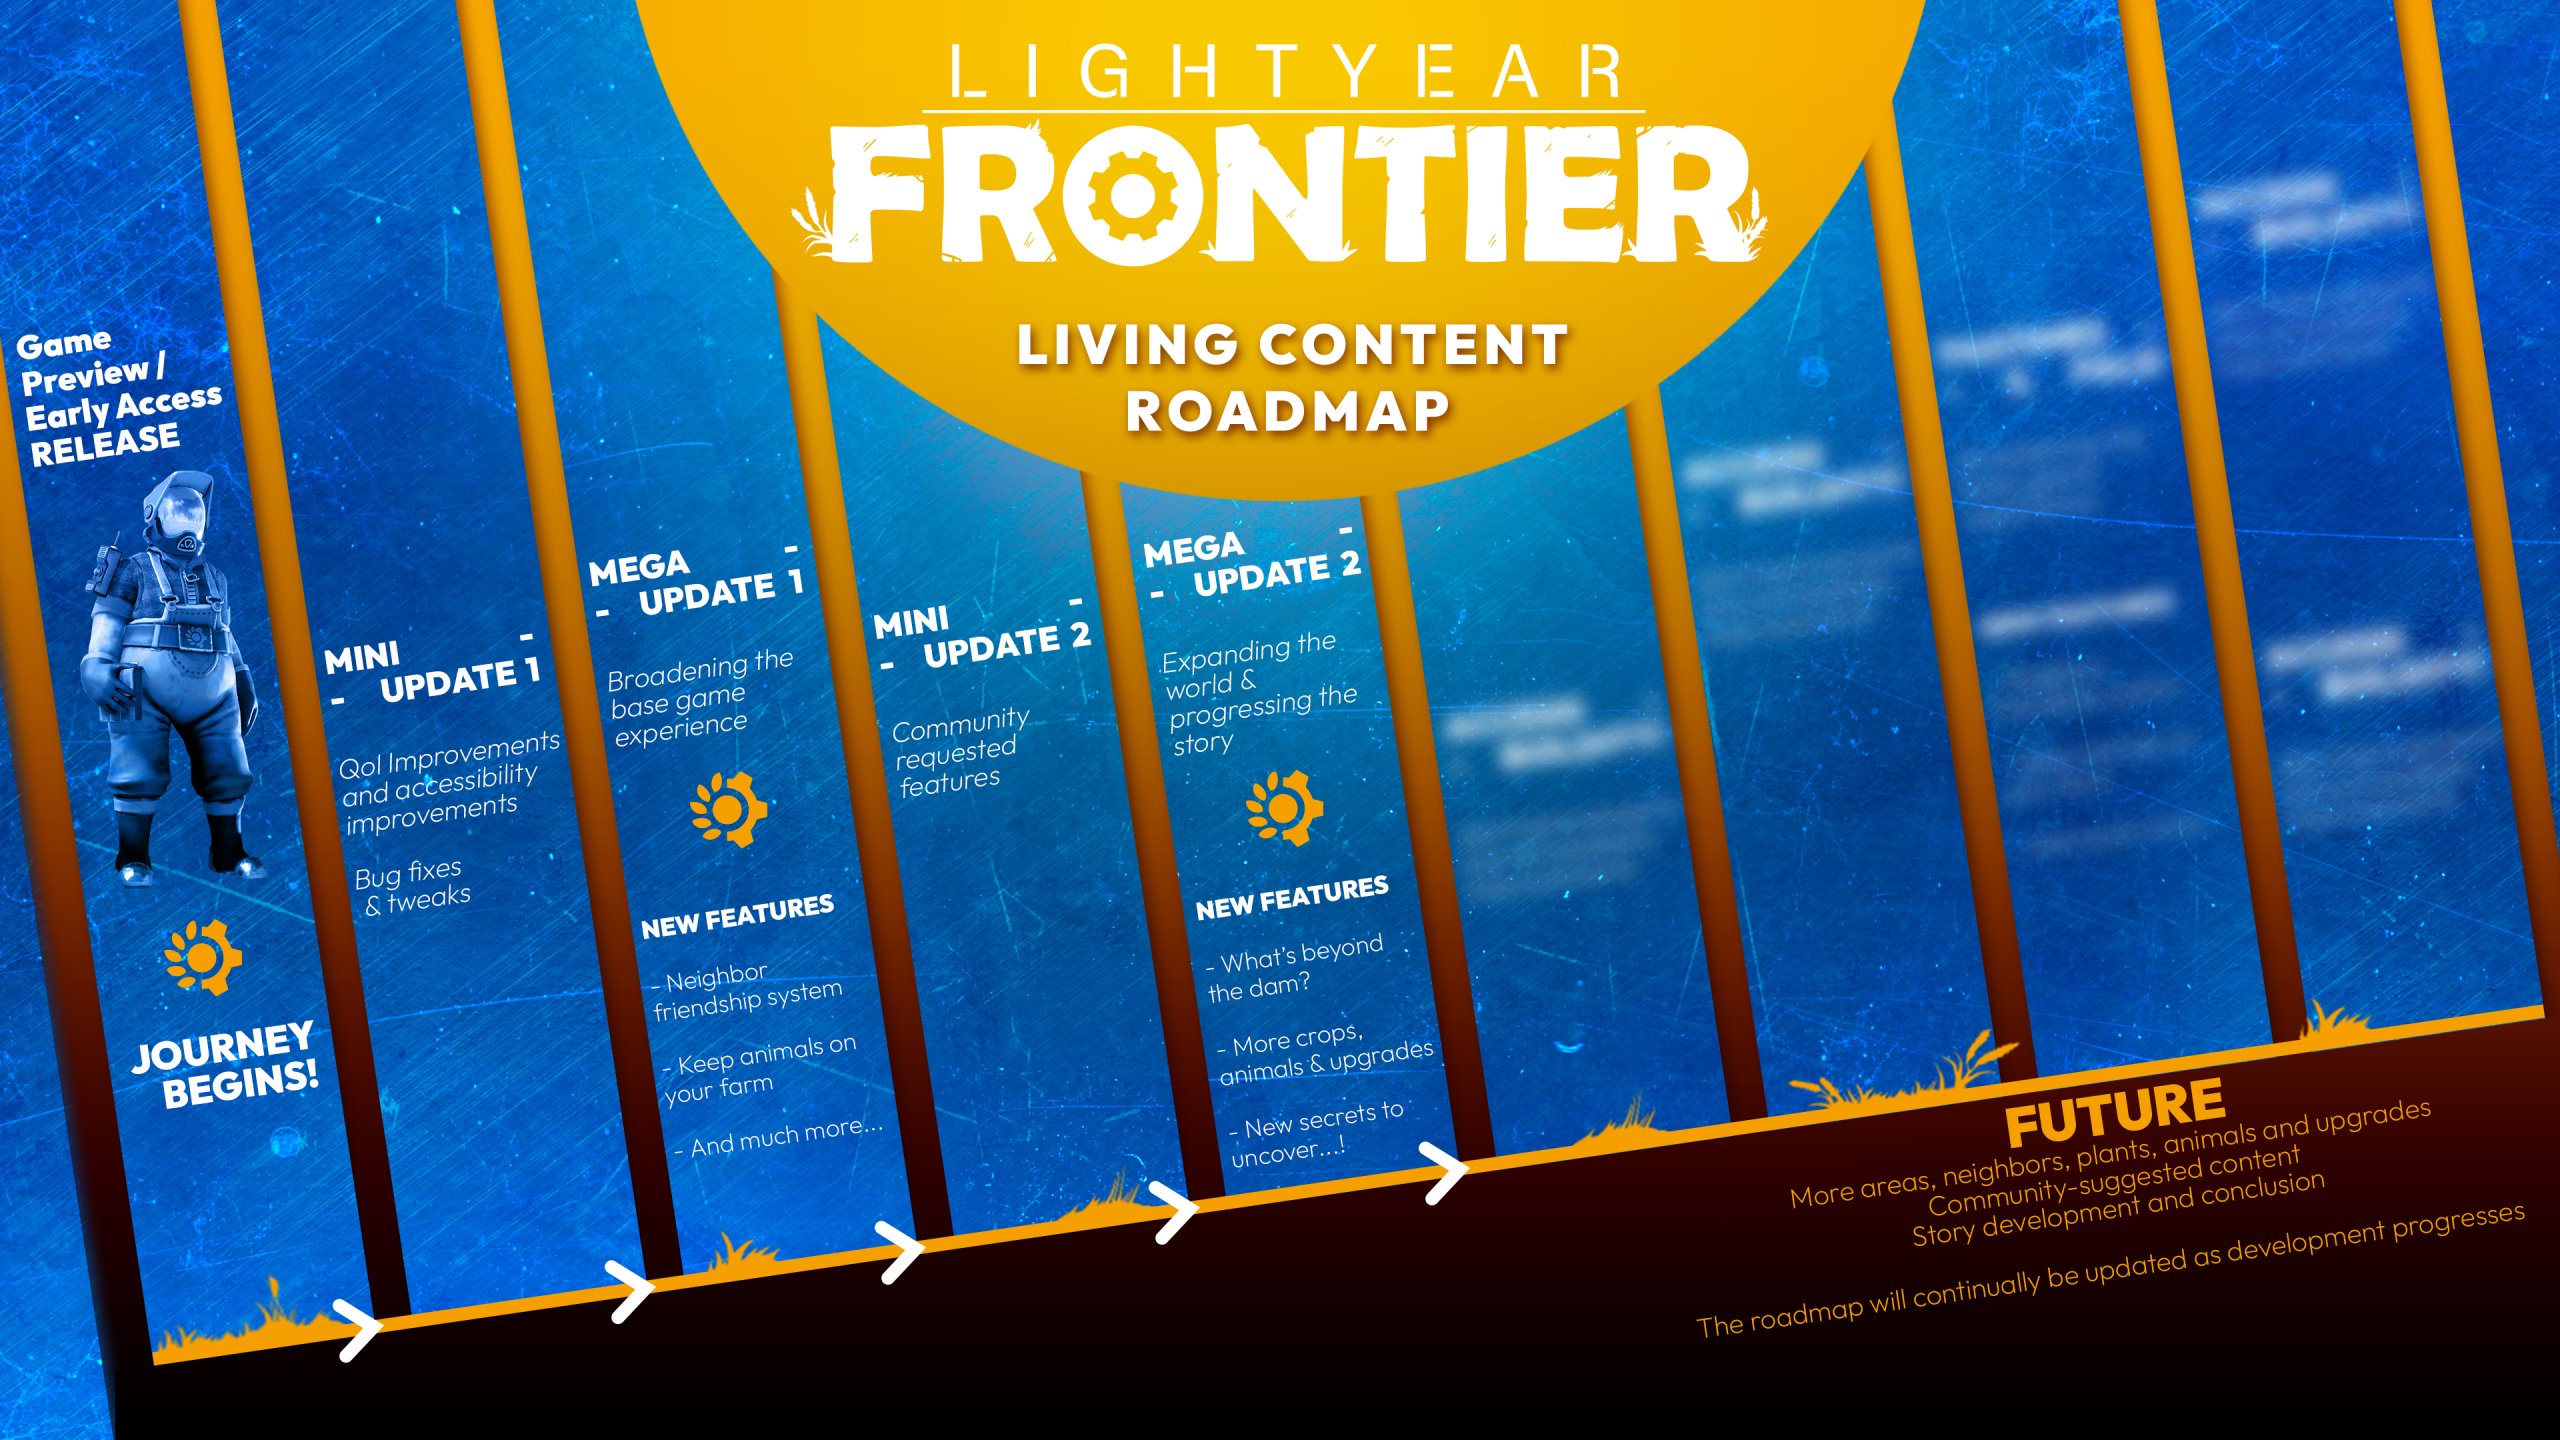 LIGHTYEAR FRONTIER - LIVING CONTENT ROADMAP COLUMN 1: Game Preview/Early Access Release - Journey begins! COLUMN 2: MINI UPDATE 1 - Quality of Life improvements and accessibility improvements, bug fixes and feature tweaking COLUMN 3: MEGA UPDATE 1 - Broadening the base game experience, New features (Neighbor friendship system, keep animals on your farm, and much more) COLUMN 4: MINI UPDATE 2 - Community requested features COLUMN 5: MEGA UPDATE 2 - Expanding the world, progressing the story (New features: What's beyond the dam, more crops, animals and upgrades, new secrets to uncover) UNDER COLUMNS: FUTURE - More areas, neighbors, plants, animals and upgrades, Community-suggested content, story development and conclusion; The roadmap will continually be updated as development progresses